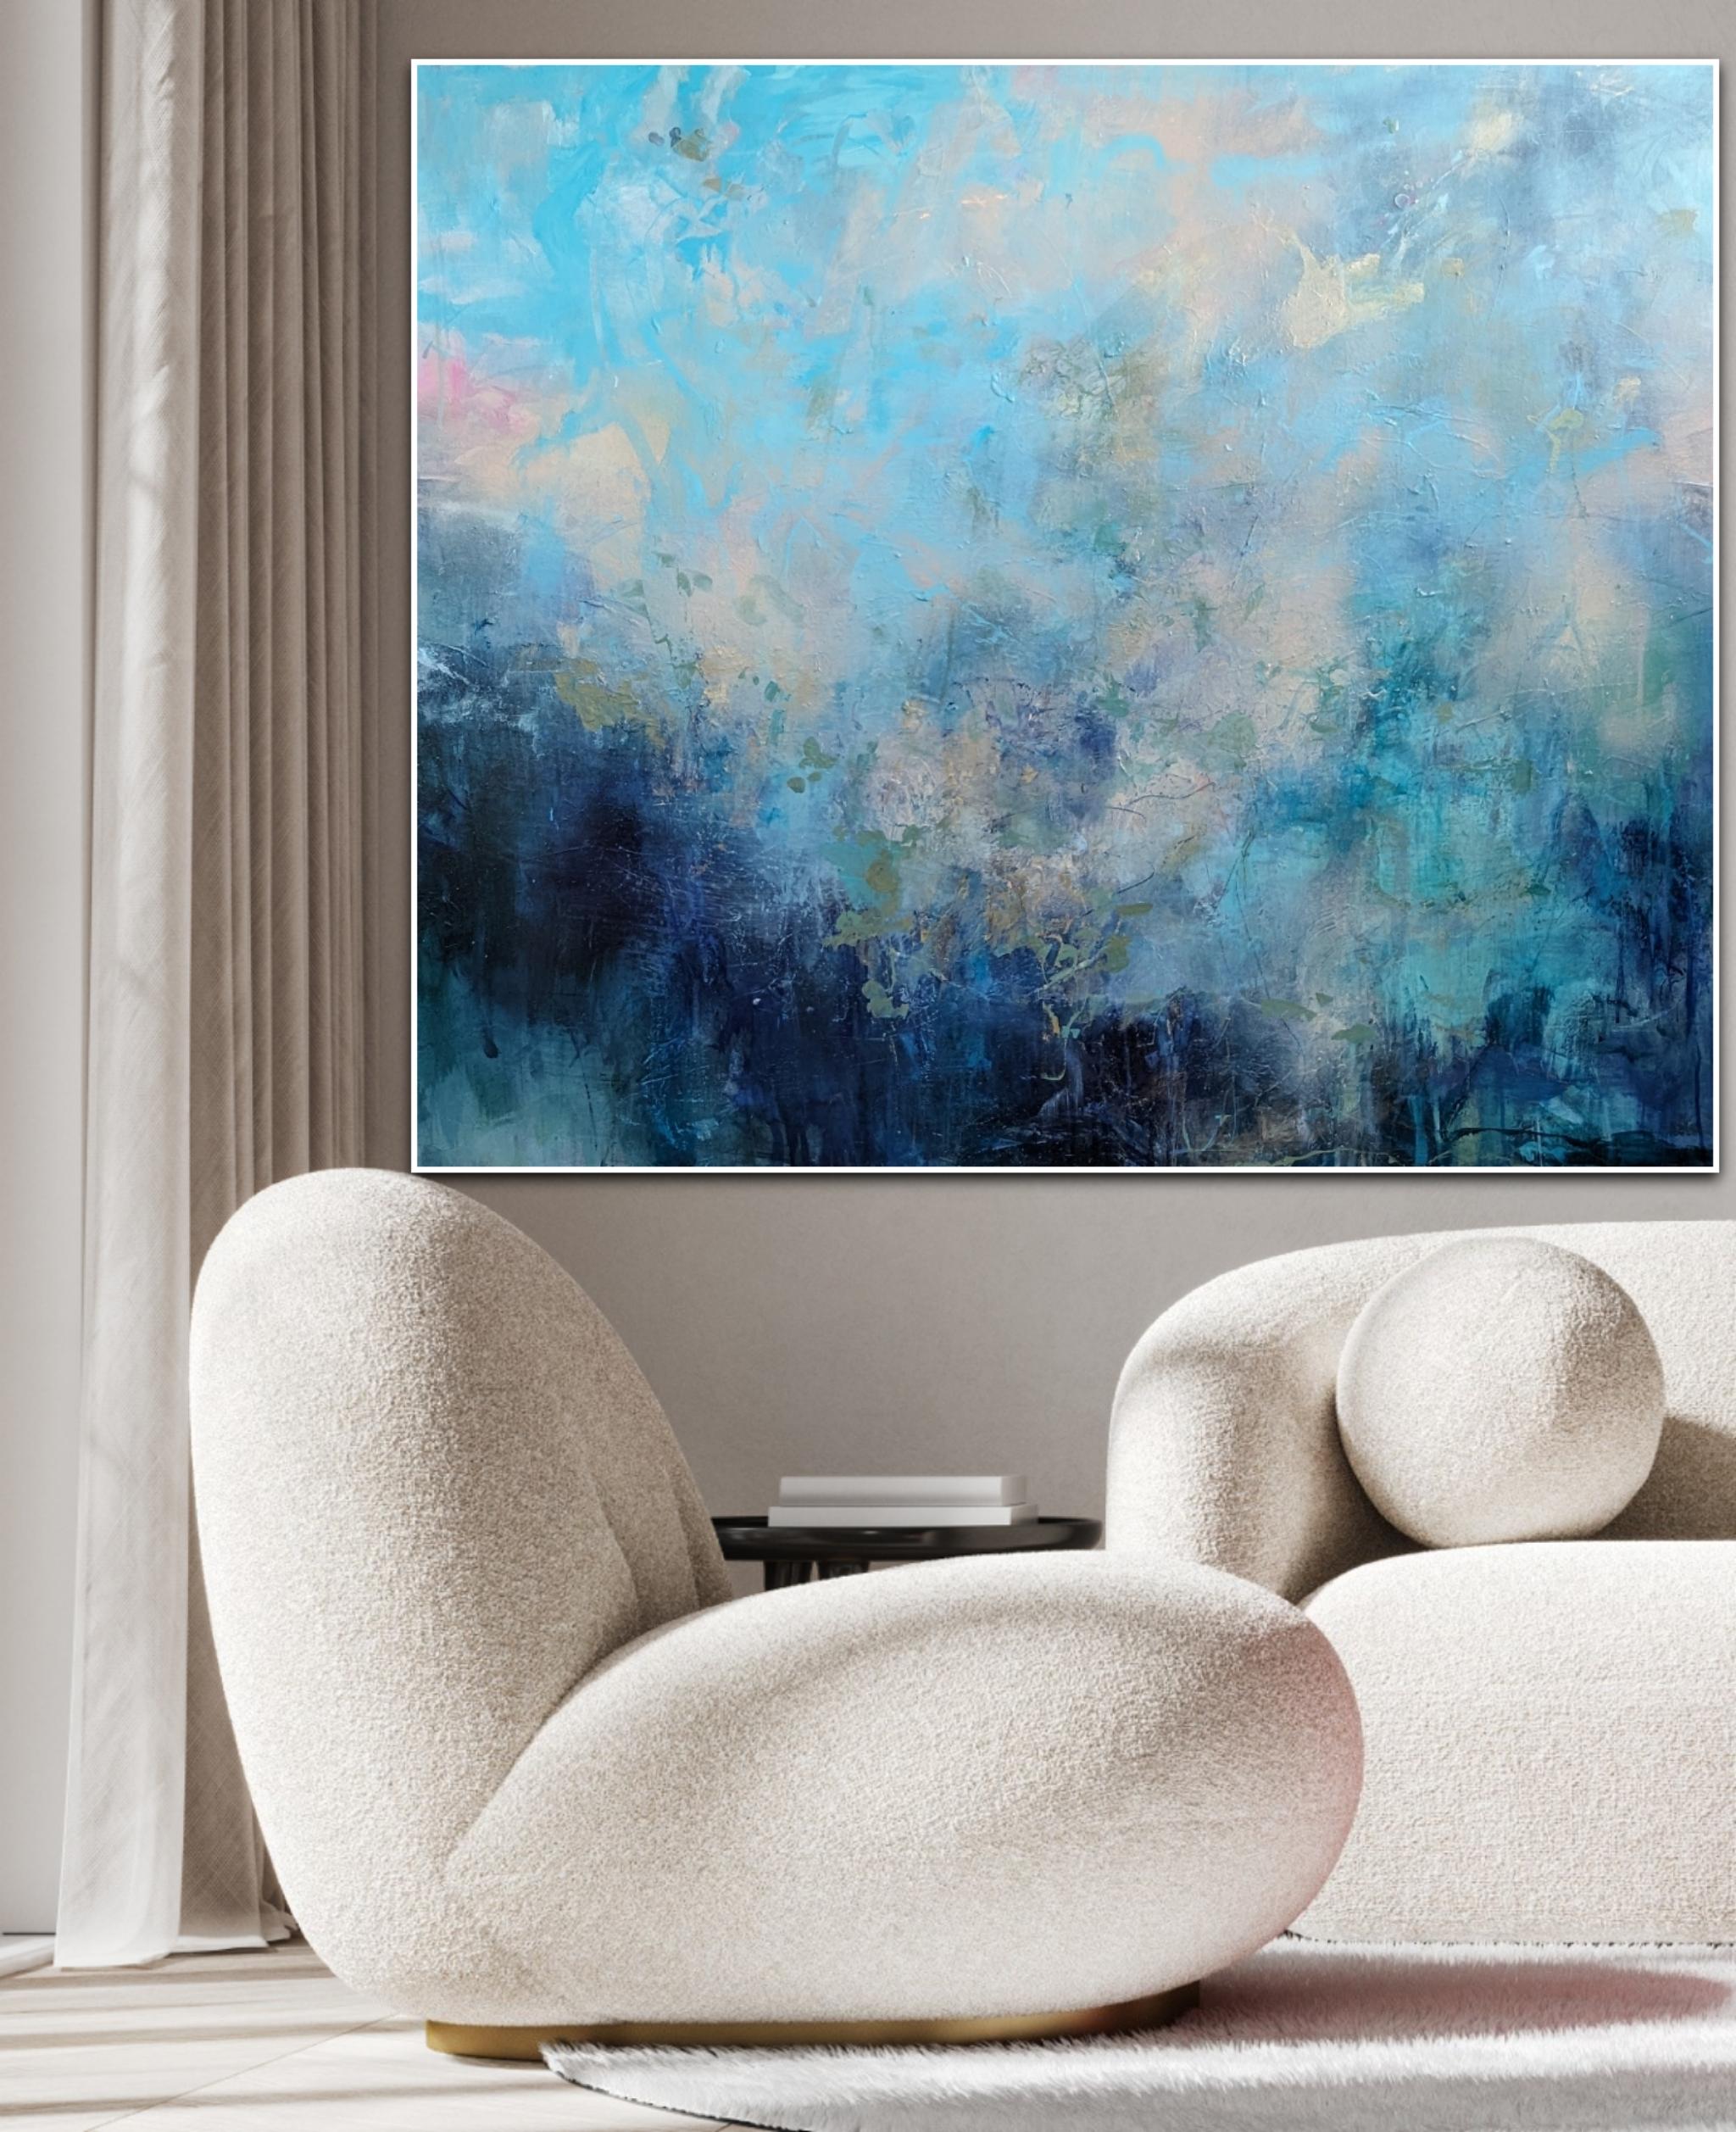 Daydreamer, Abstract Expressionist, Contemporary Art, Landscape - Painting by Sally Harrold